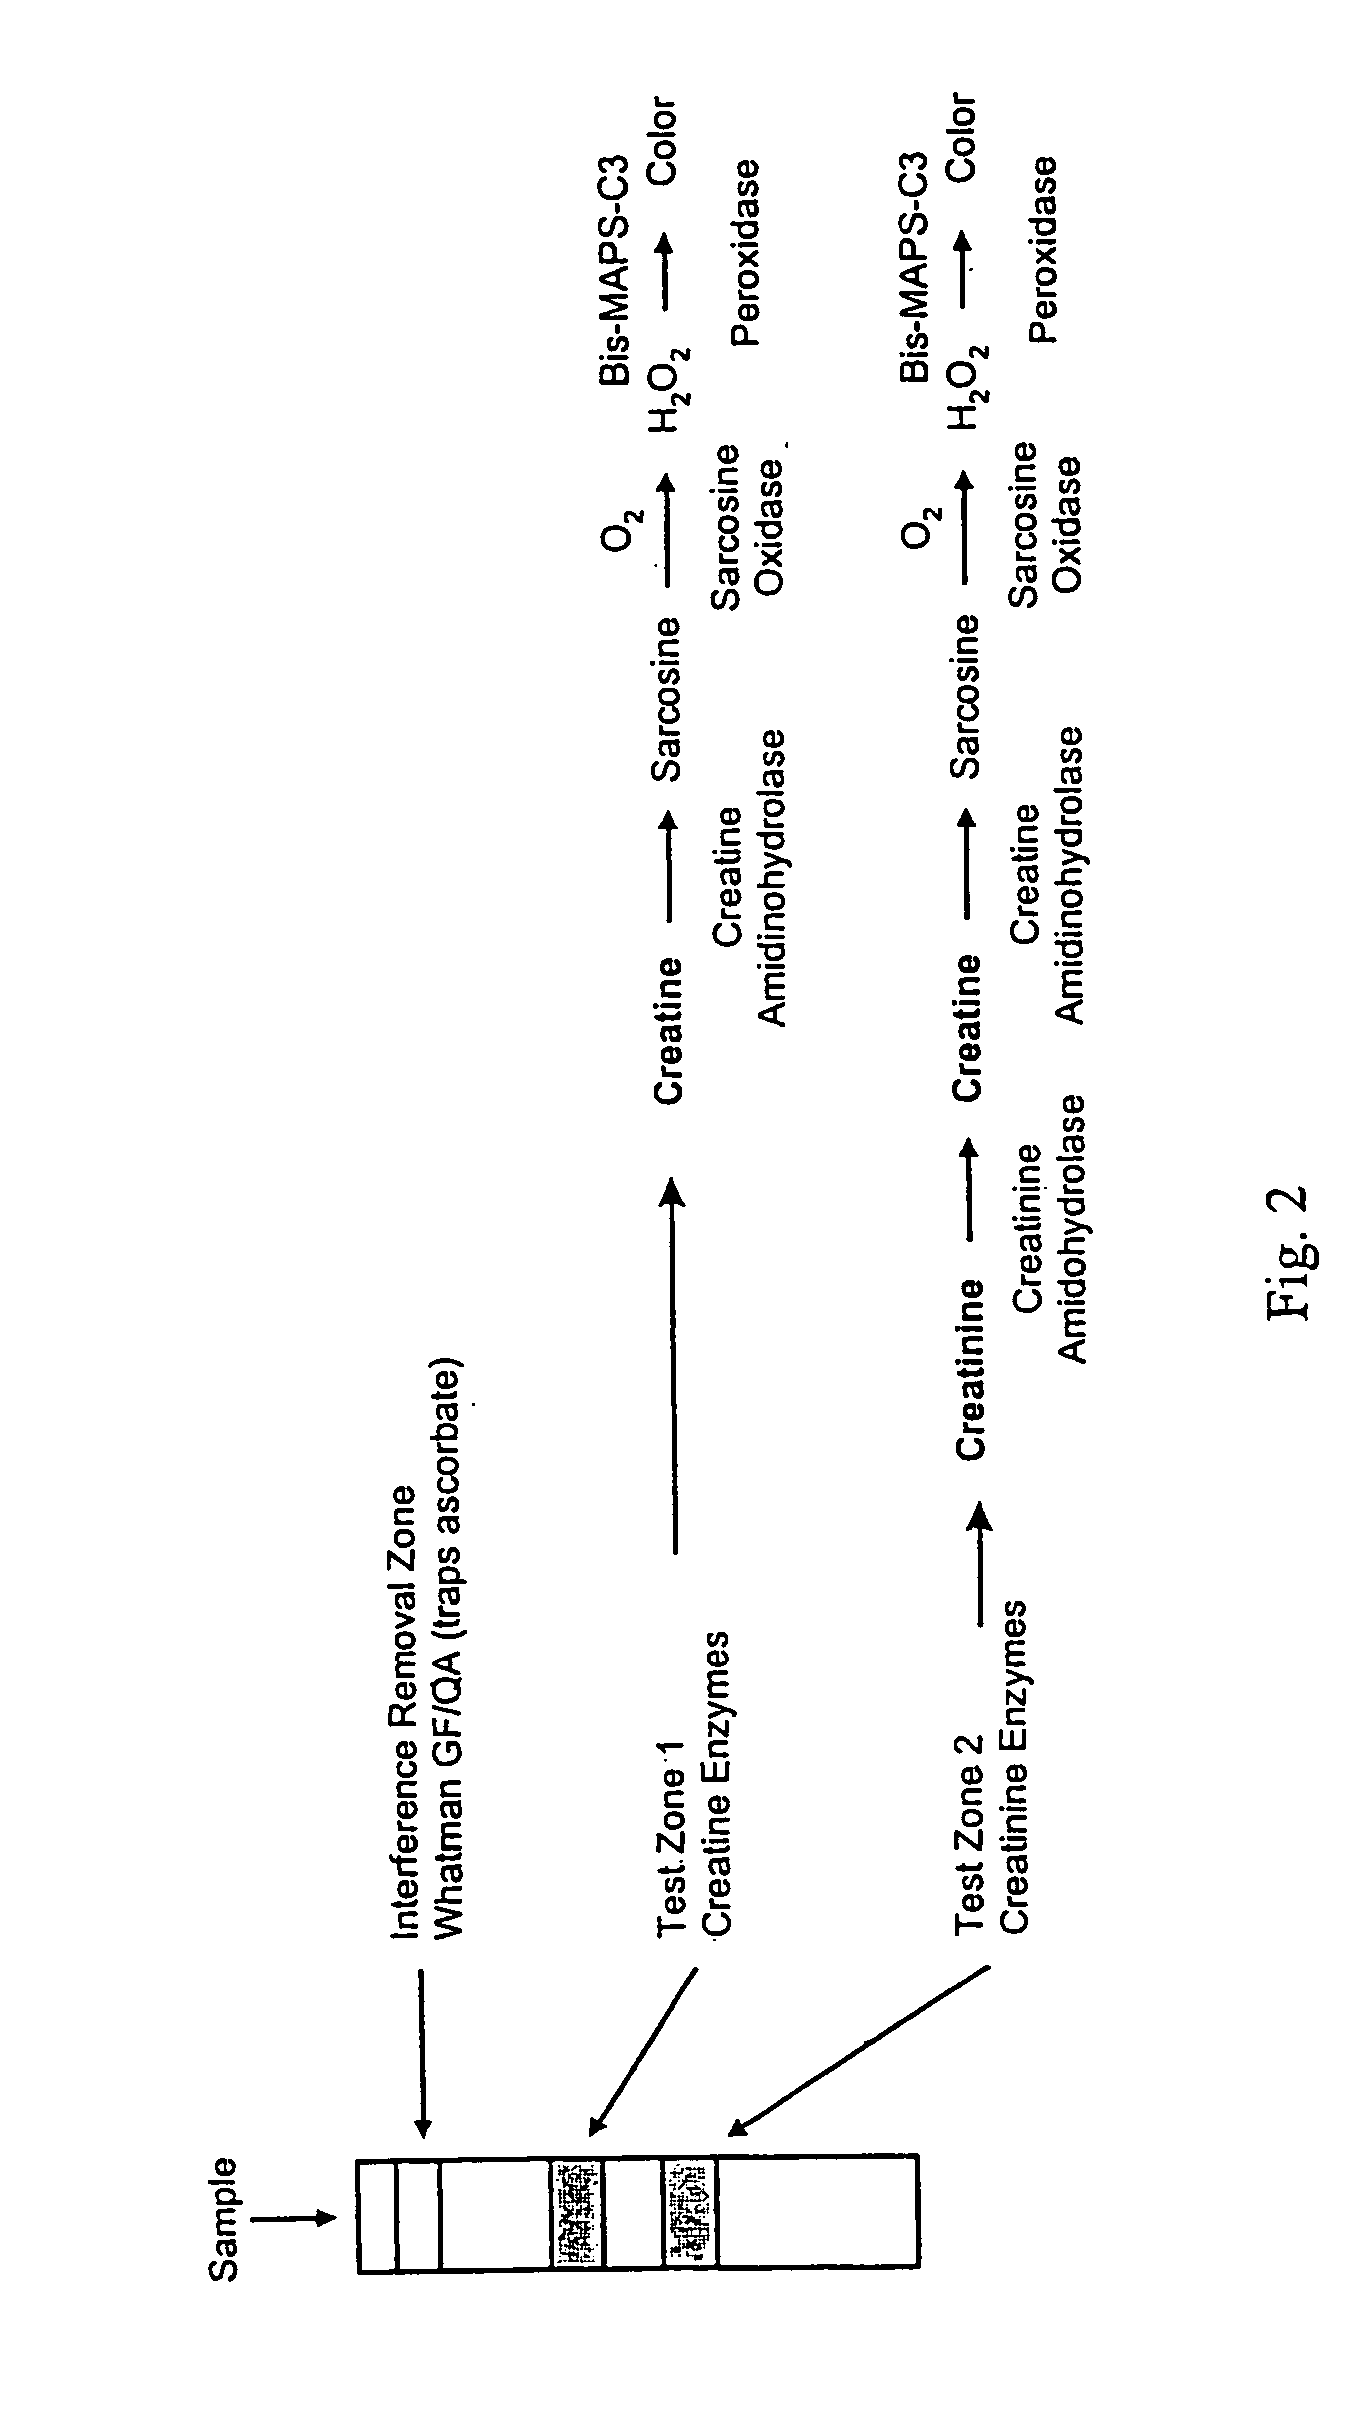 Dry reagent strip configuration, composition and method for multiple analyte determination